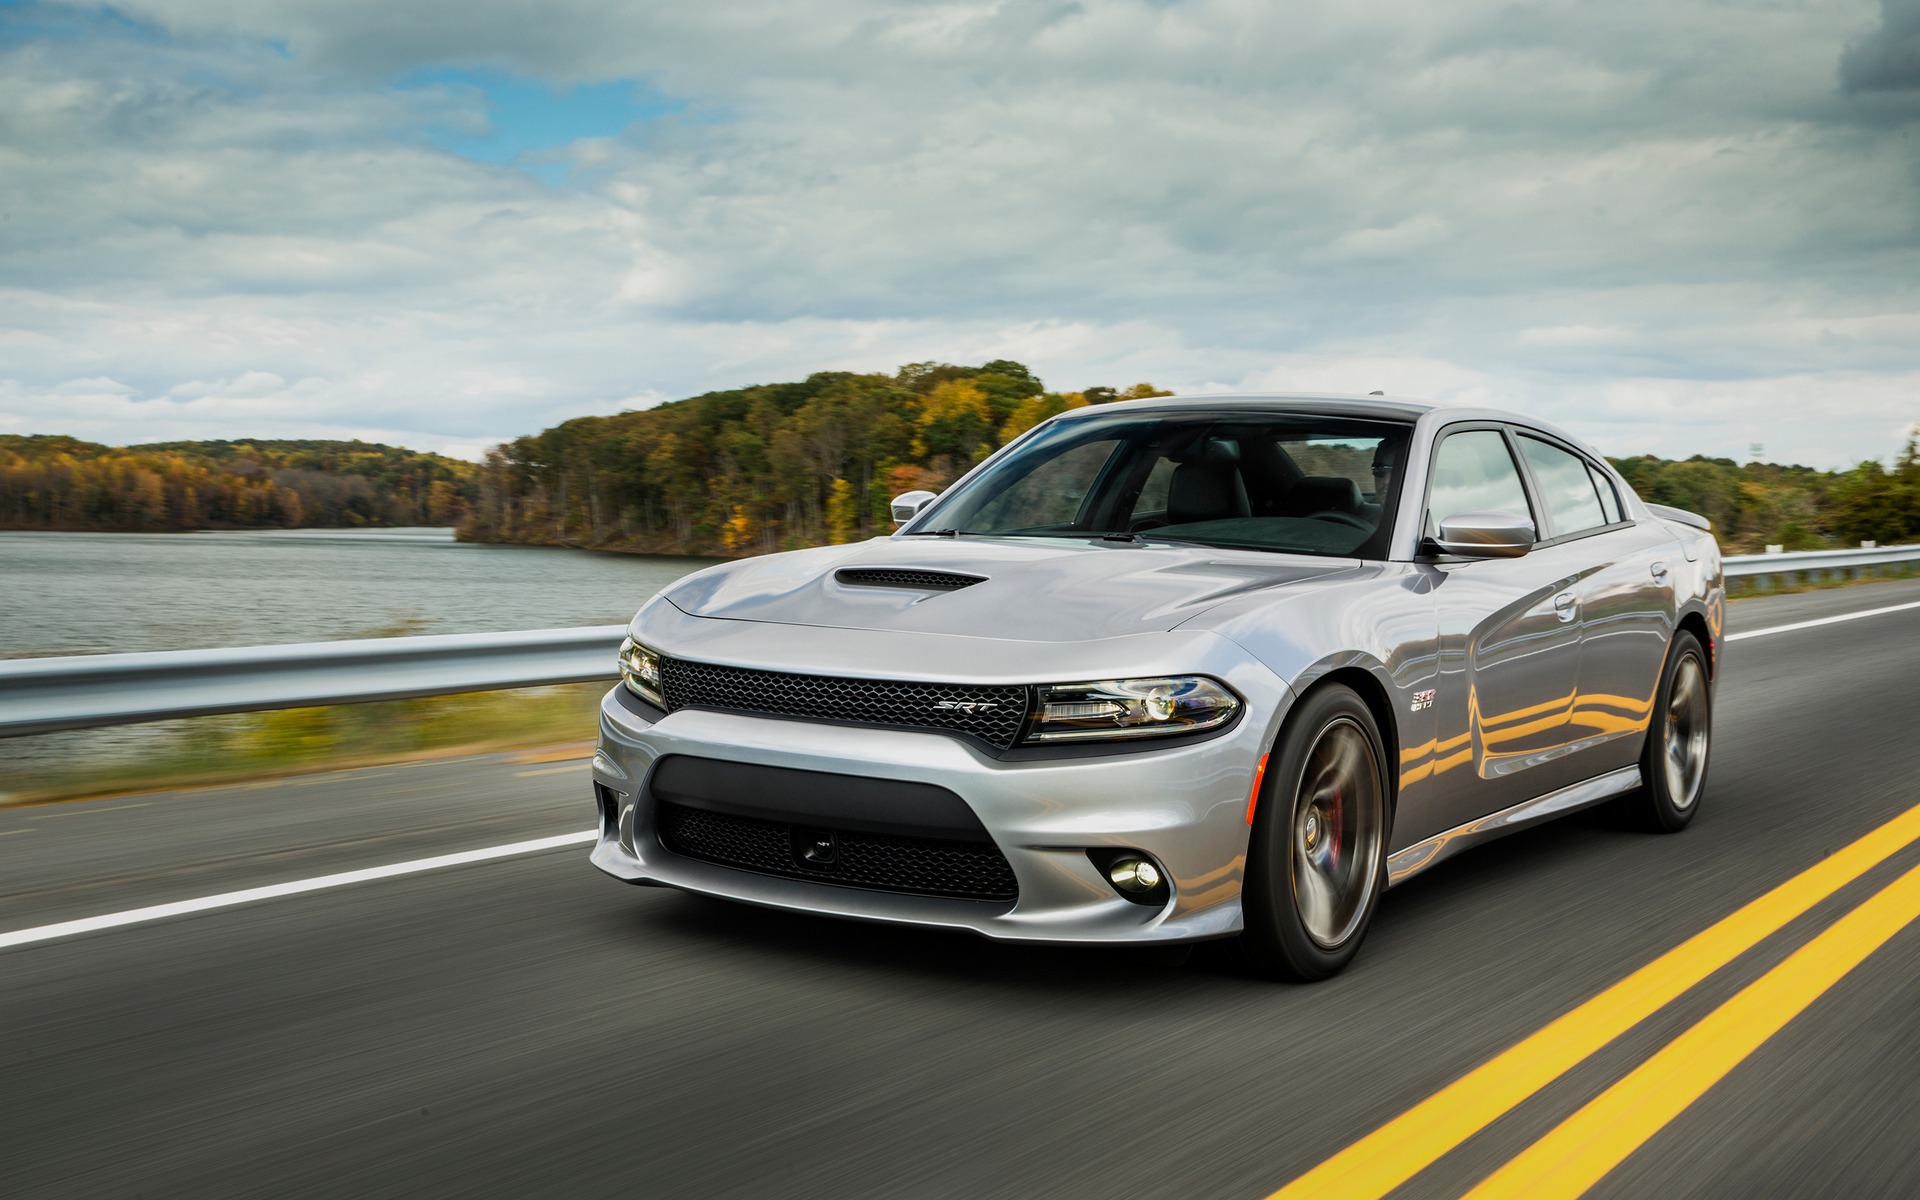 2018 Dodge Charger SRT Hellcat Specifications - The Car Guide